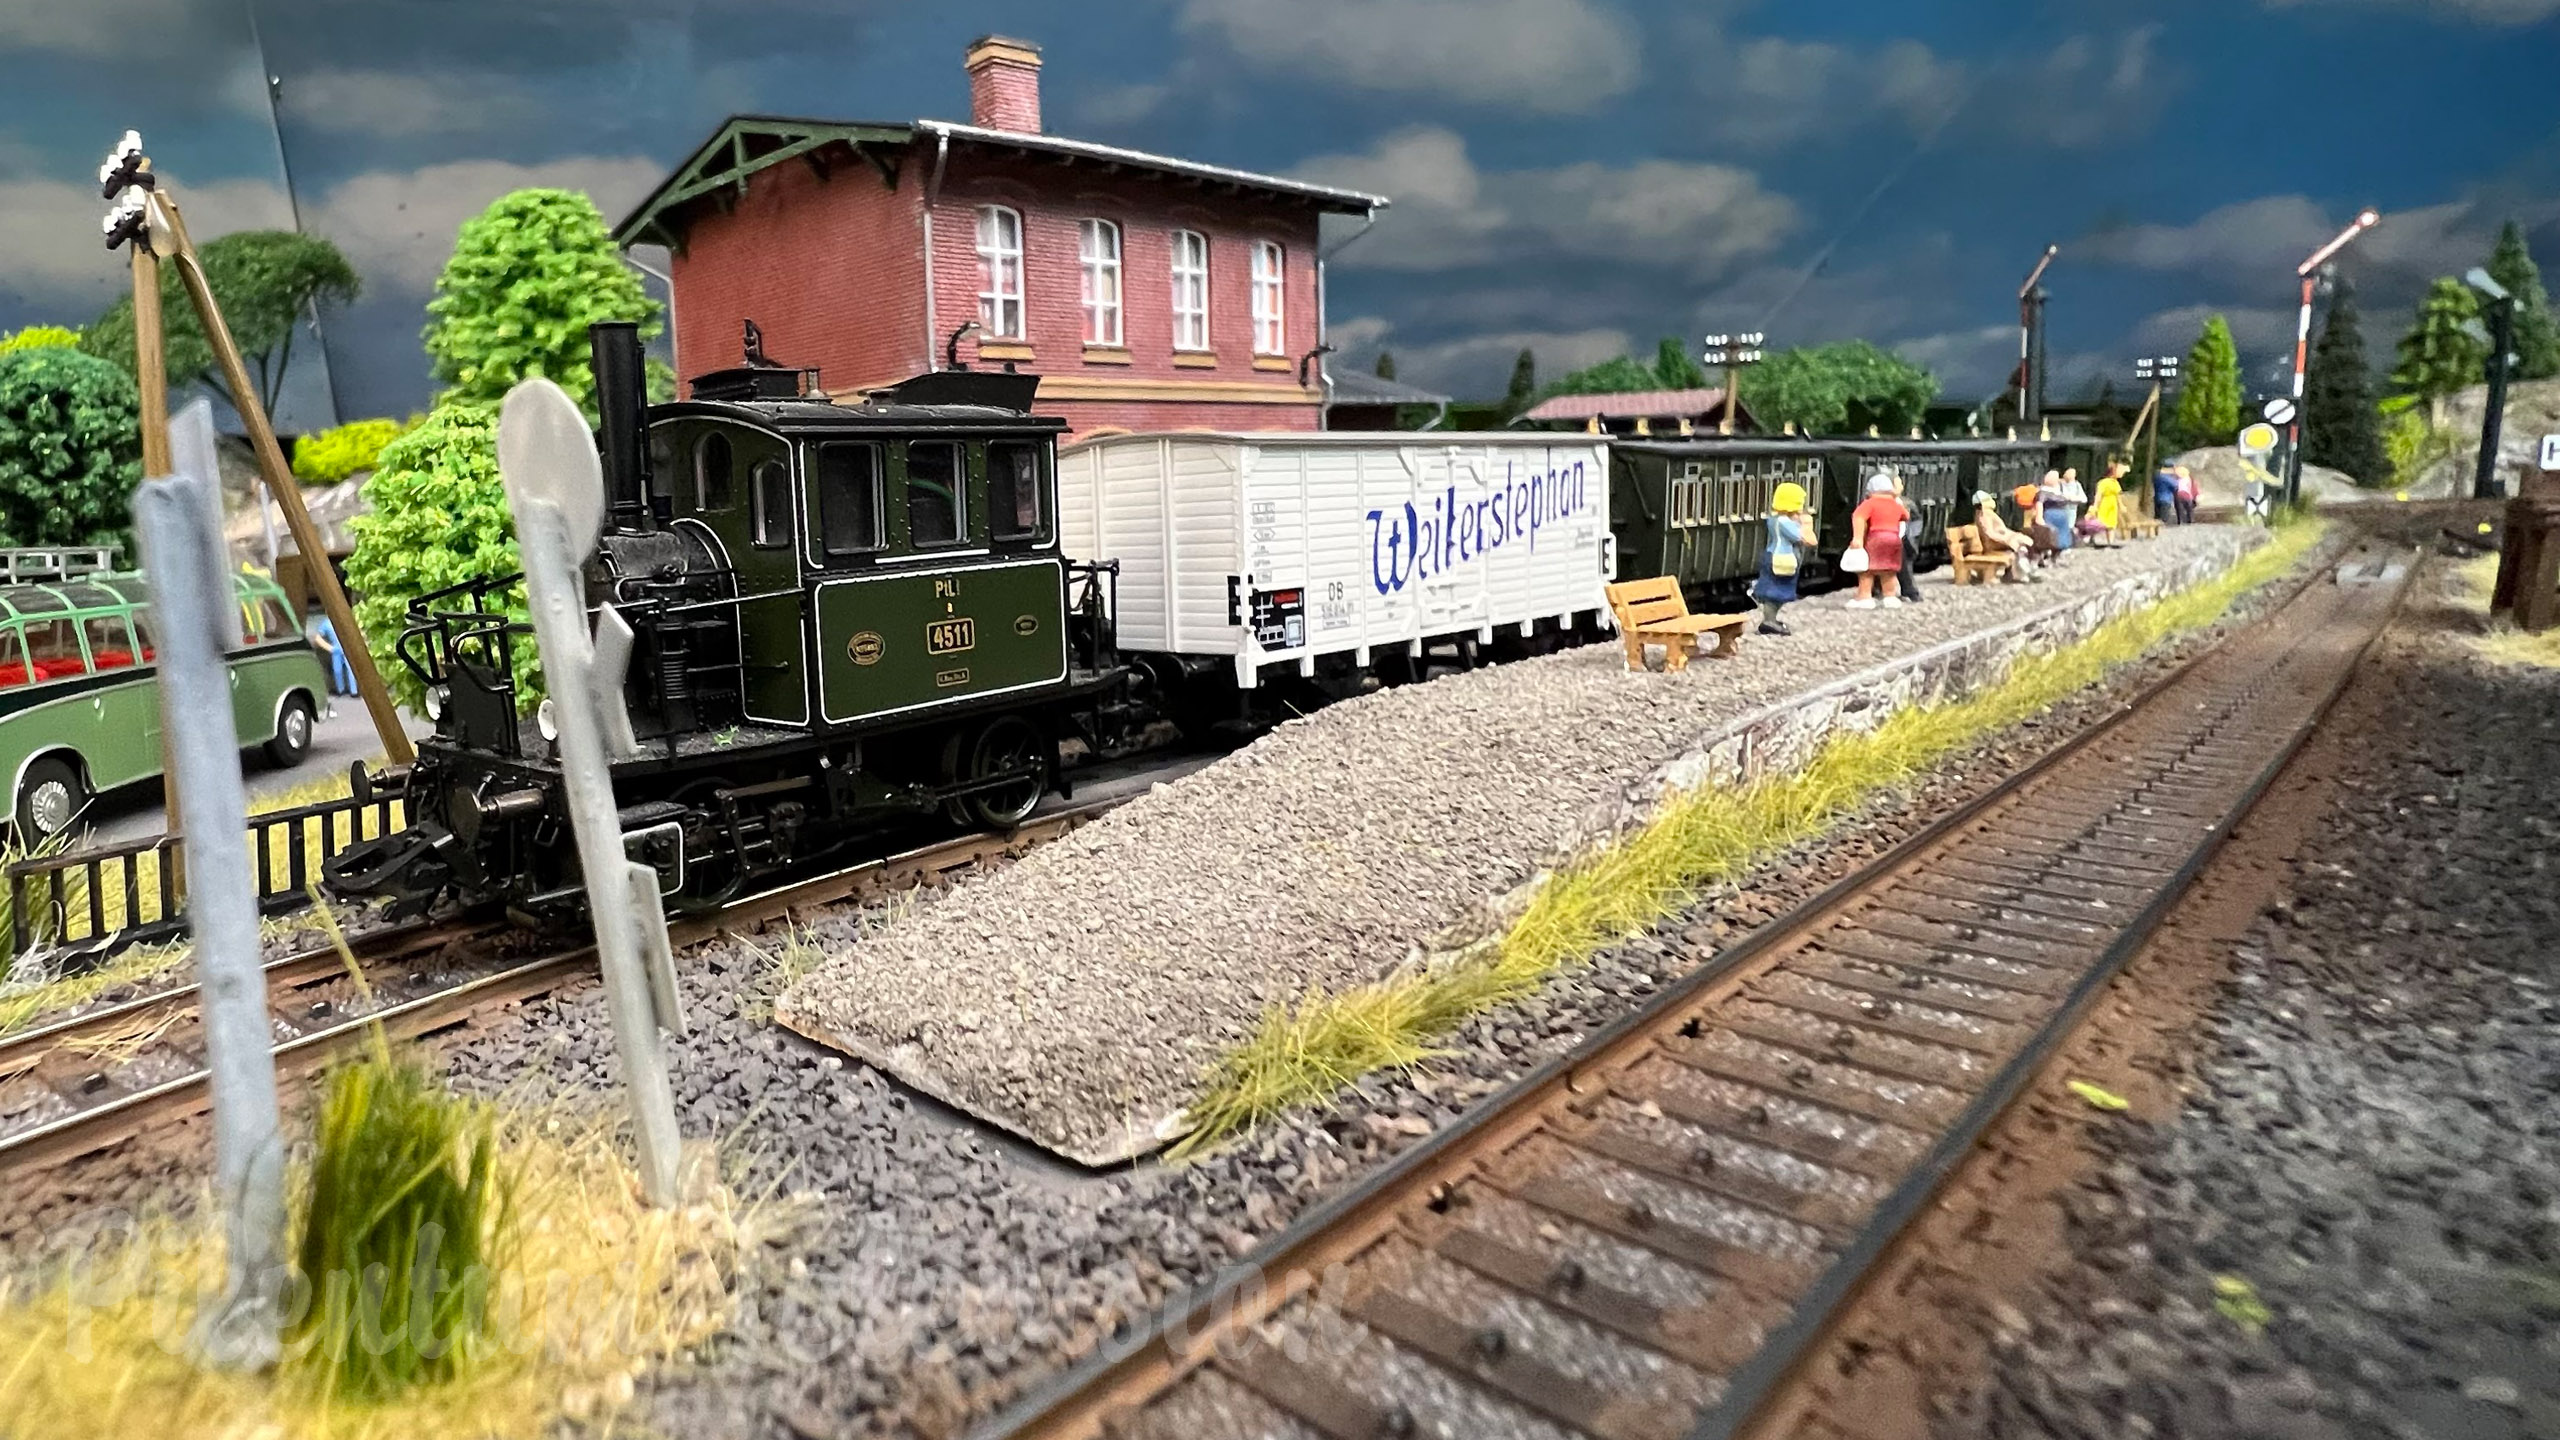 HO Scale Steam Locomotive Model Railway Layout with Thousands of Details (Germany)